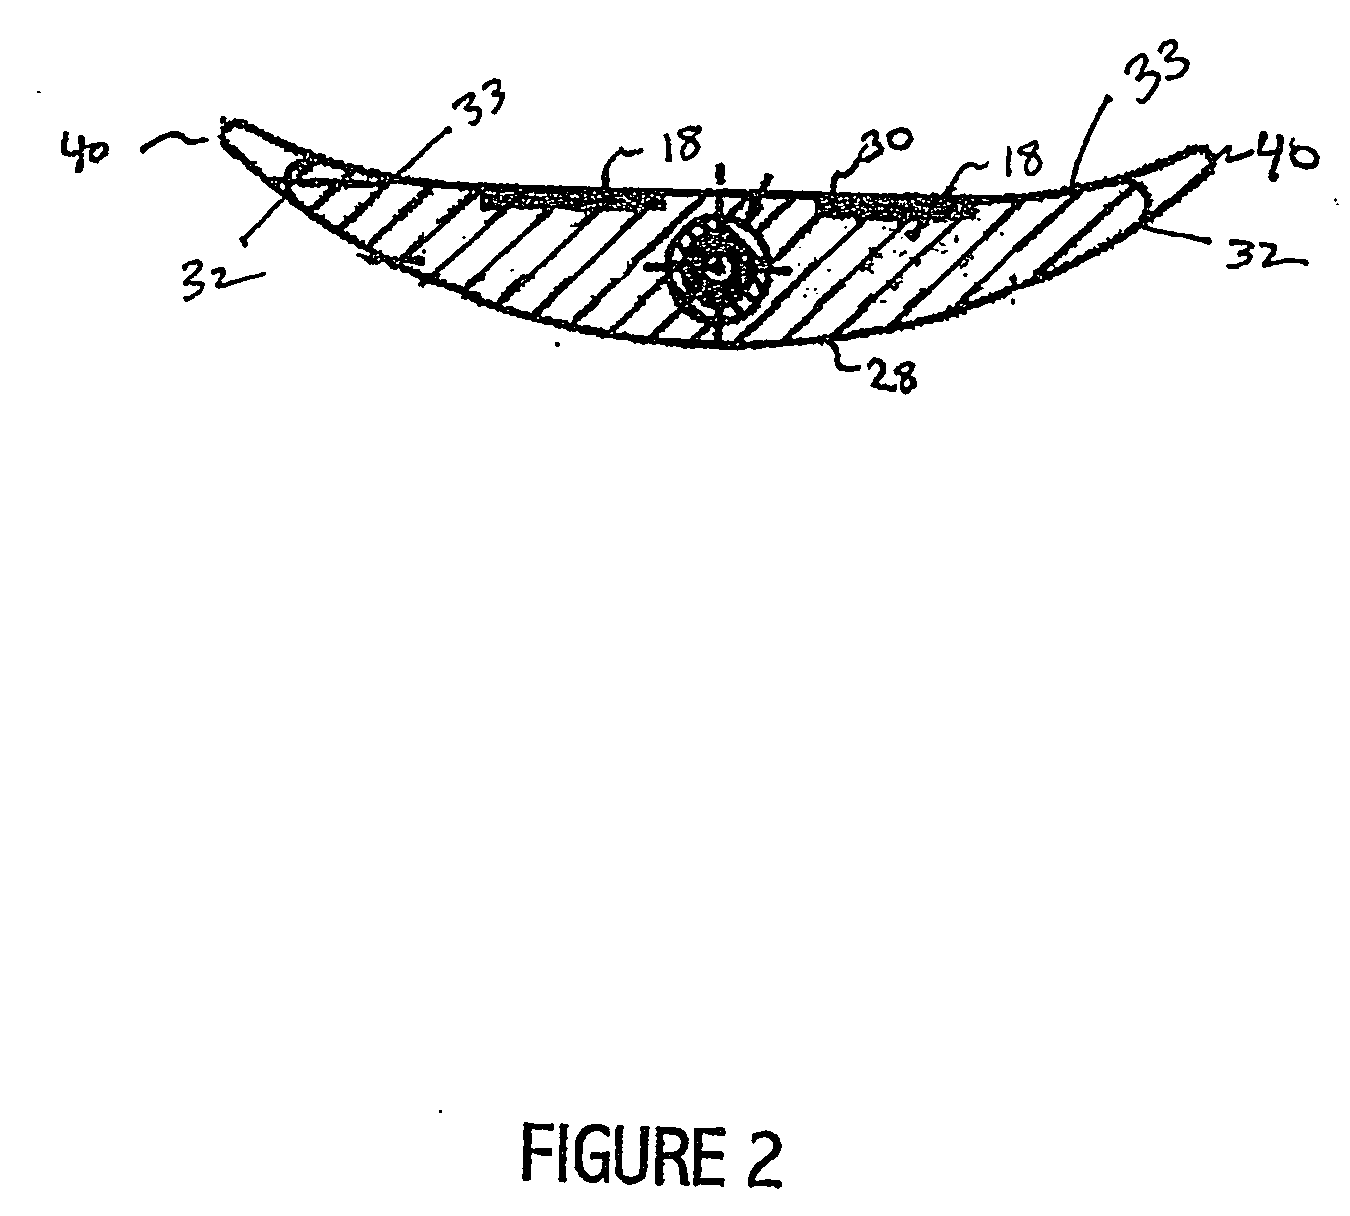 Winged electrode body for spinal cord stimulation